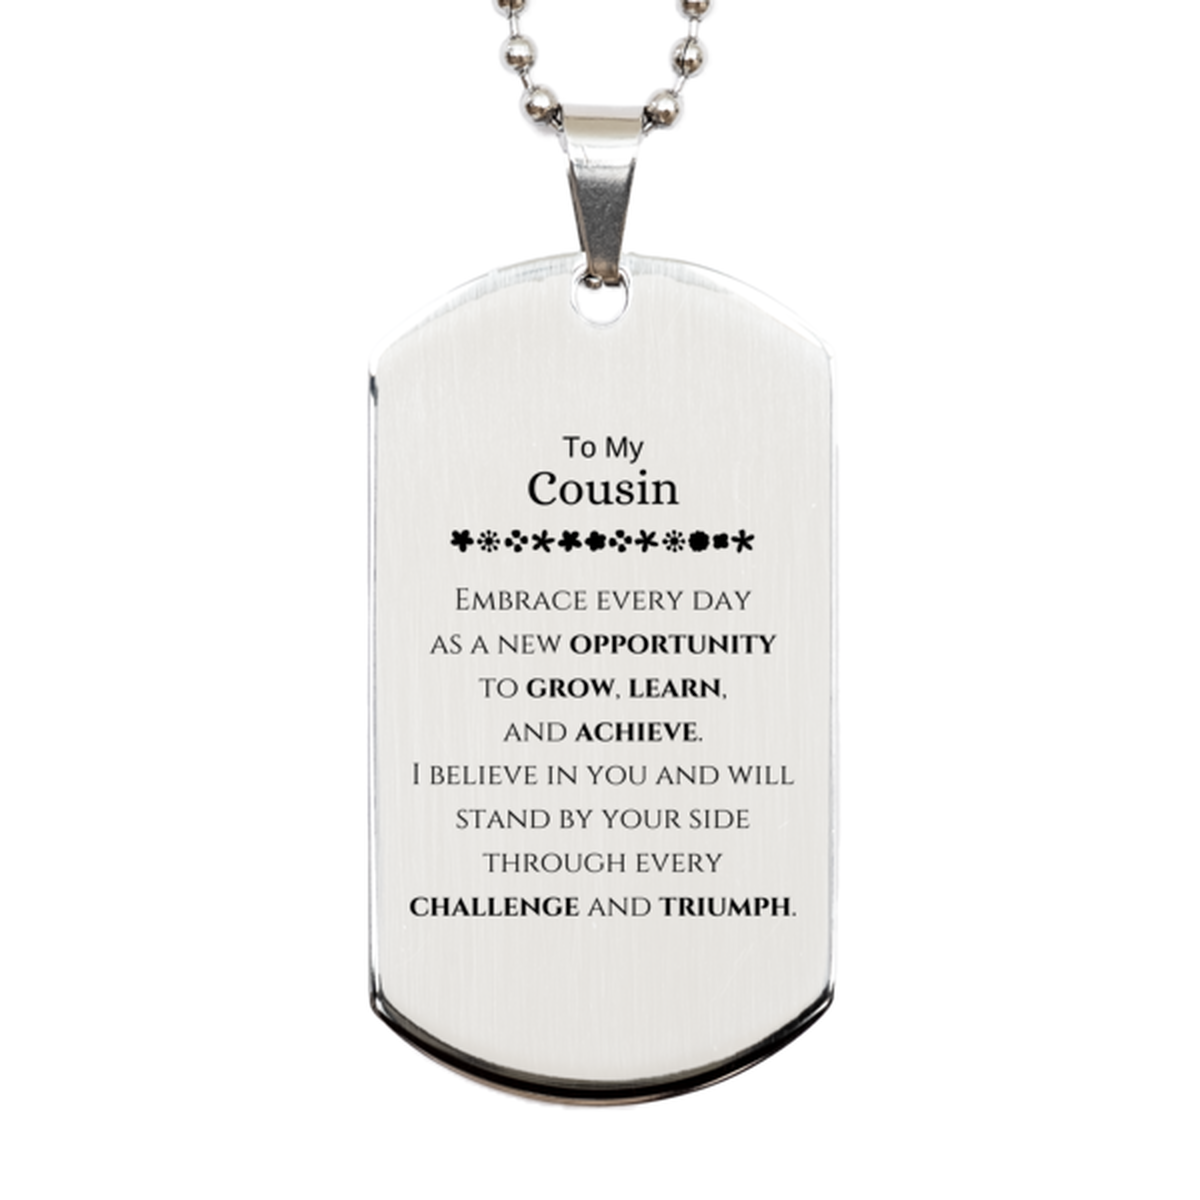 To My Cousin Gifts, I believe in you and will stand by your side, Inspirational Silver Dog Tag For Cousin, Birthday Christmas Motivational Cousin Gifts